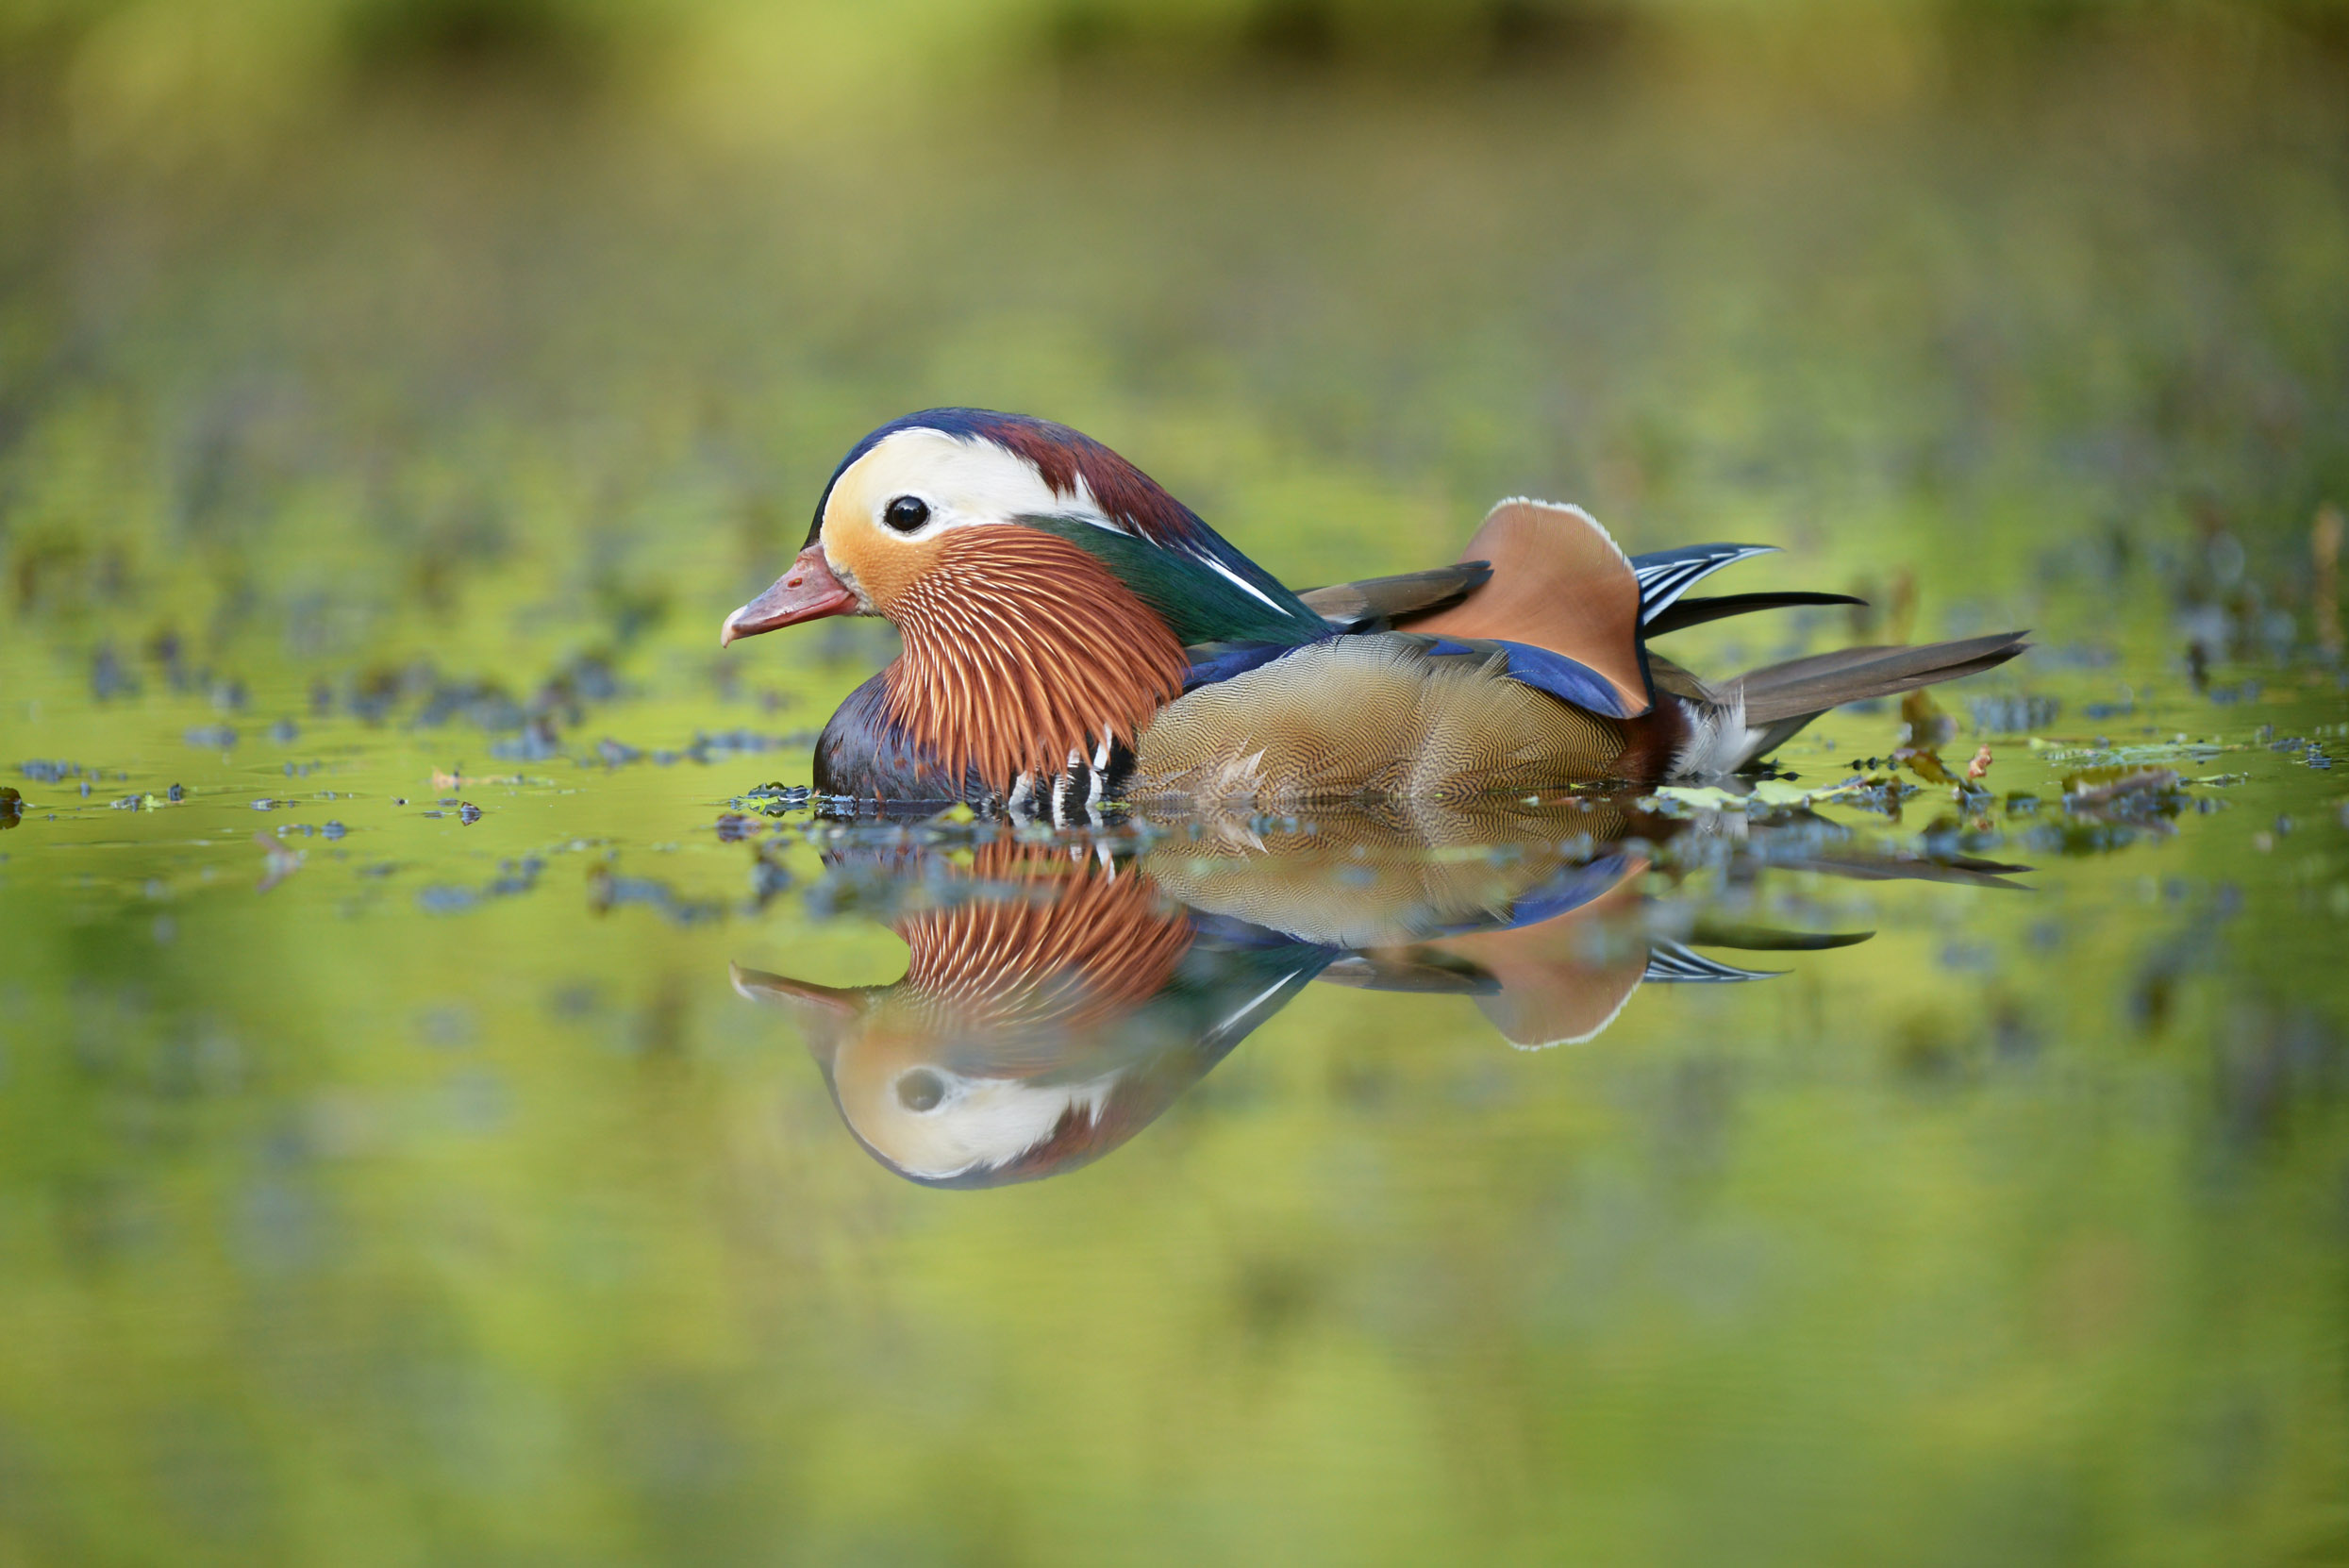 The male Mandarin is sat on a body of water staring at their reflection.